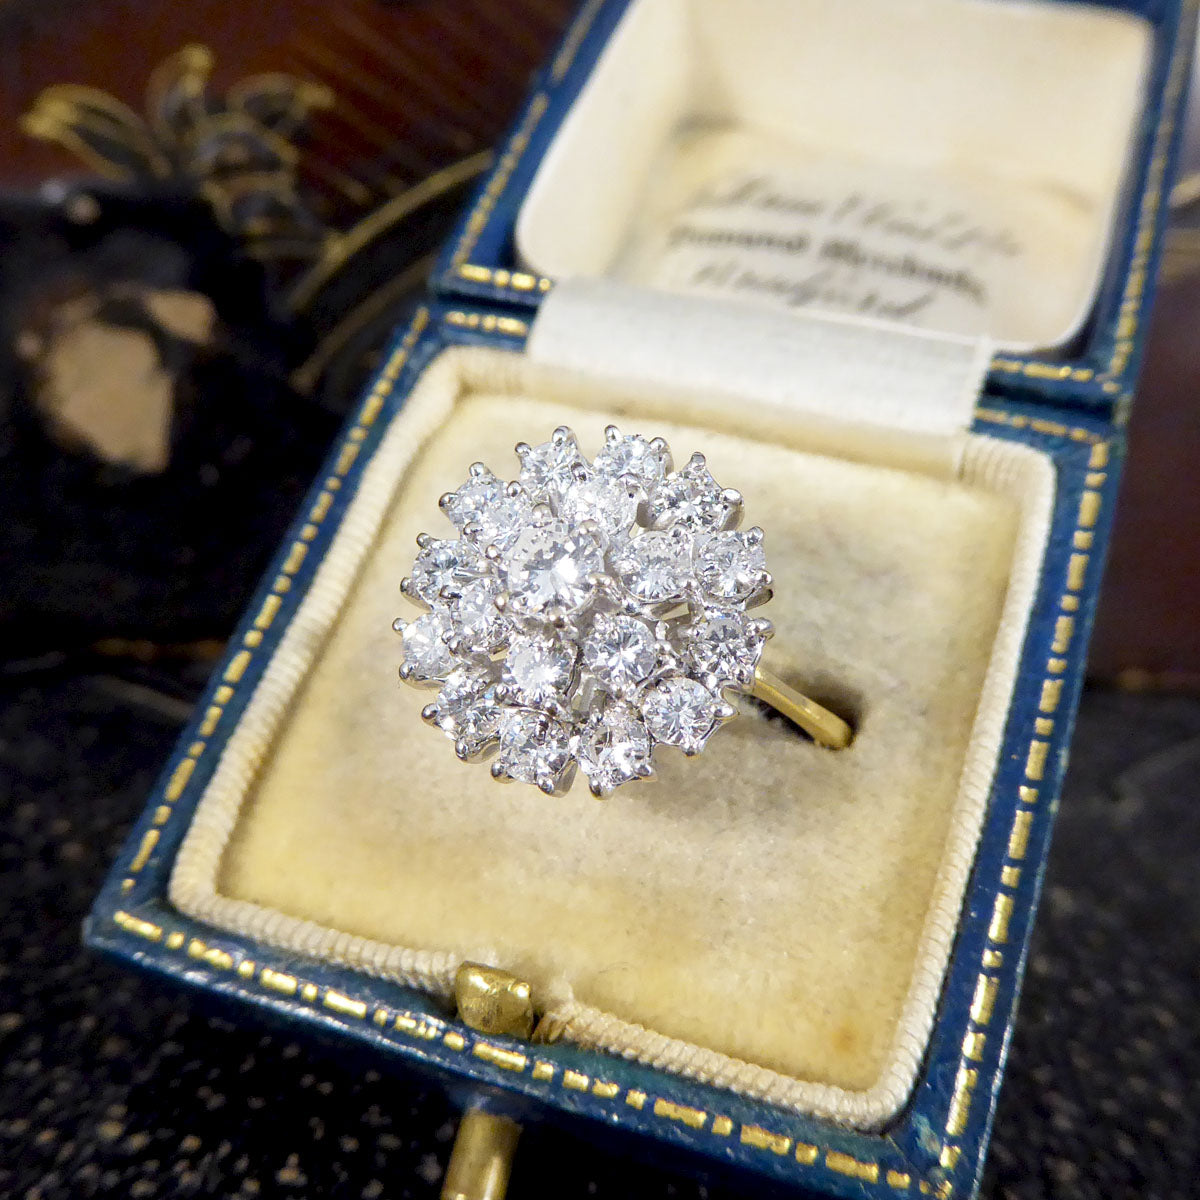 Vintage 1.46ct Diamond Flower Cluster Ring in 18ct Yellow and White Gold